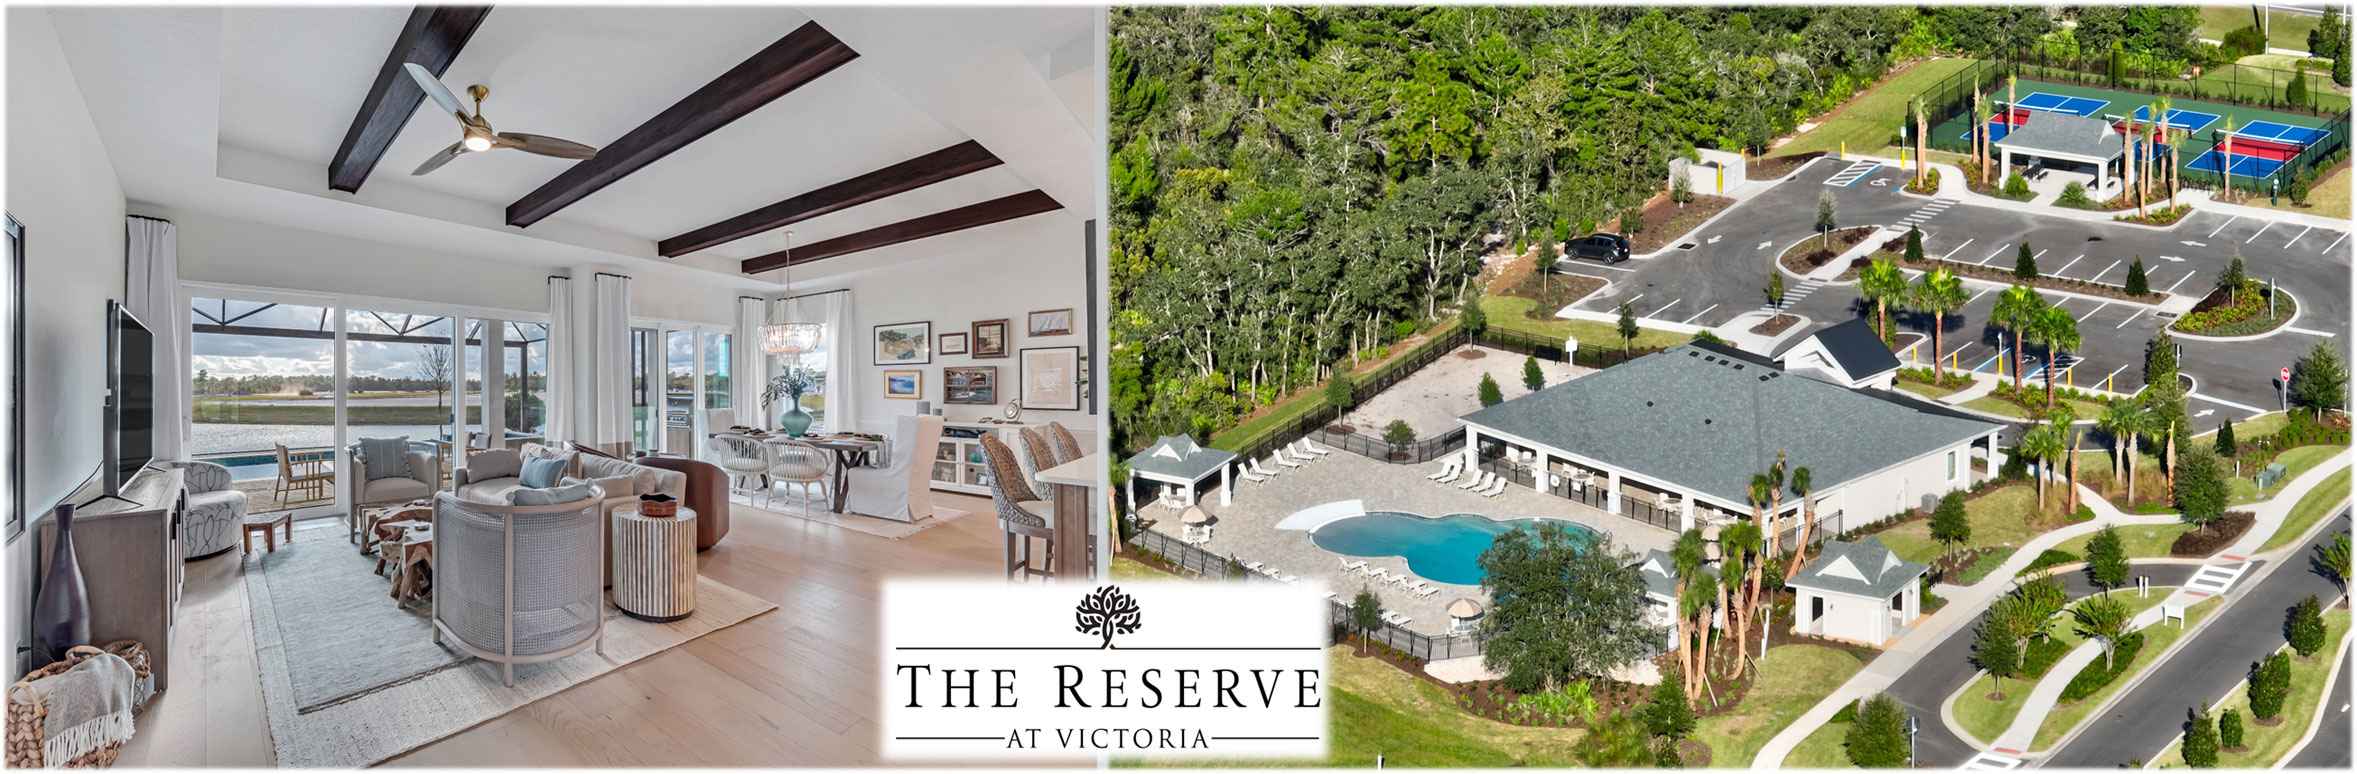 The Reserve at Victoria Header Image